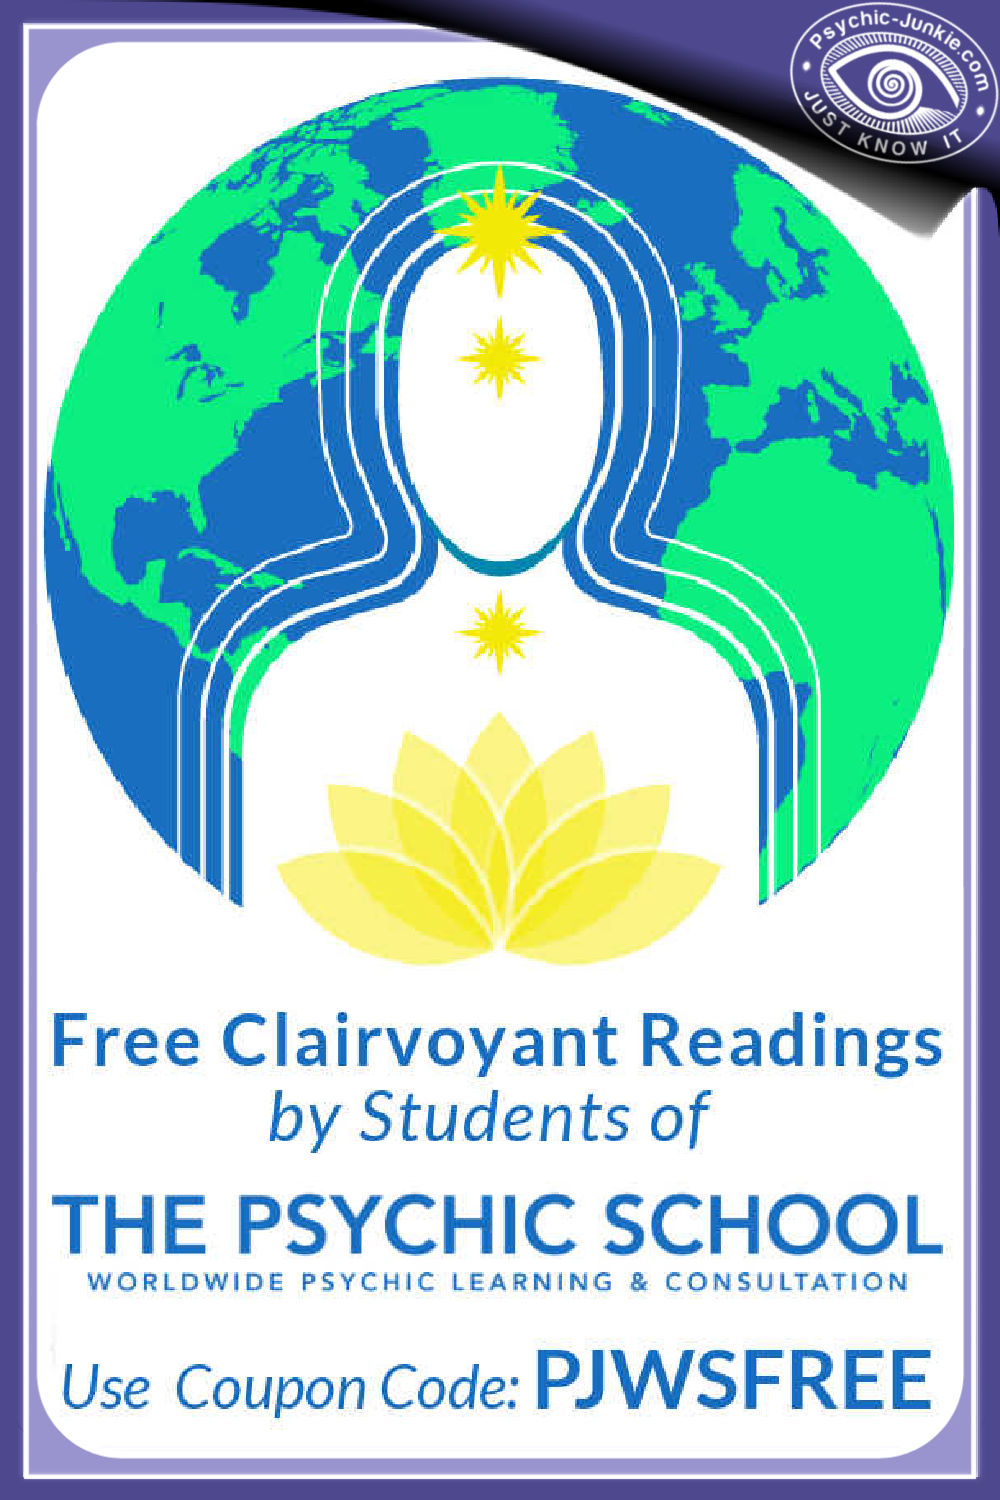 Free Clairvoyant Reading By Phone, App, Or Computer. Use Coupon Code: PJWSFREE